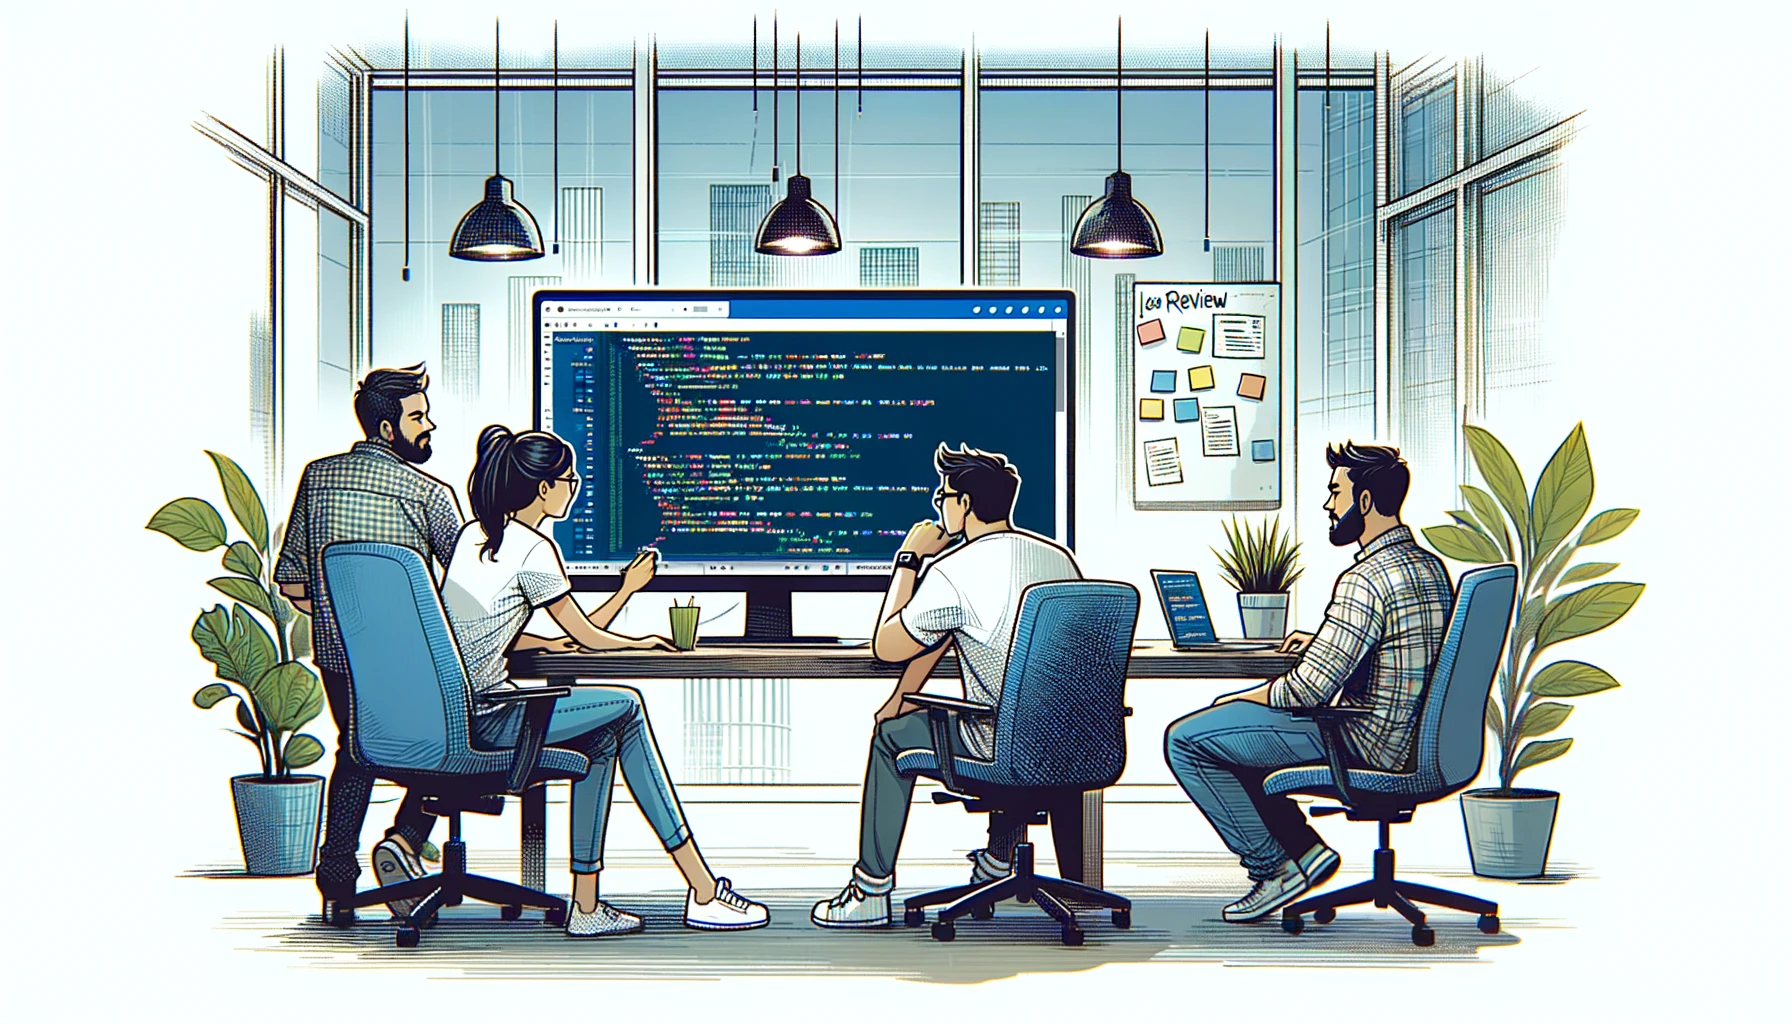 Code reviews are an integral part of the software development process, serving as a checkpoint to ensure quality, consistency, and collaborative knowledge sharing within a development team.